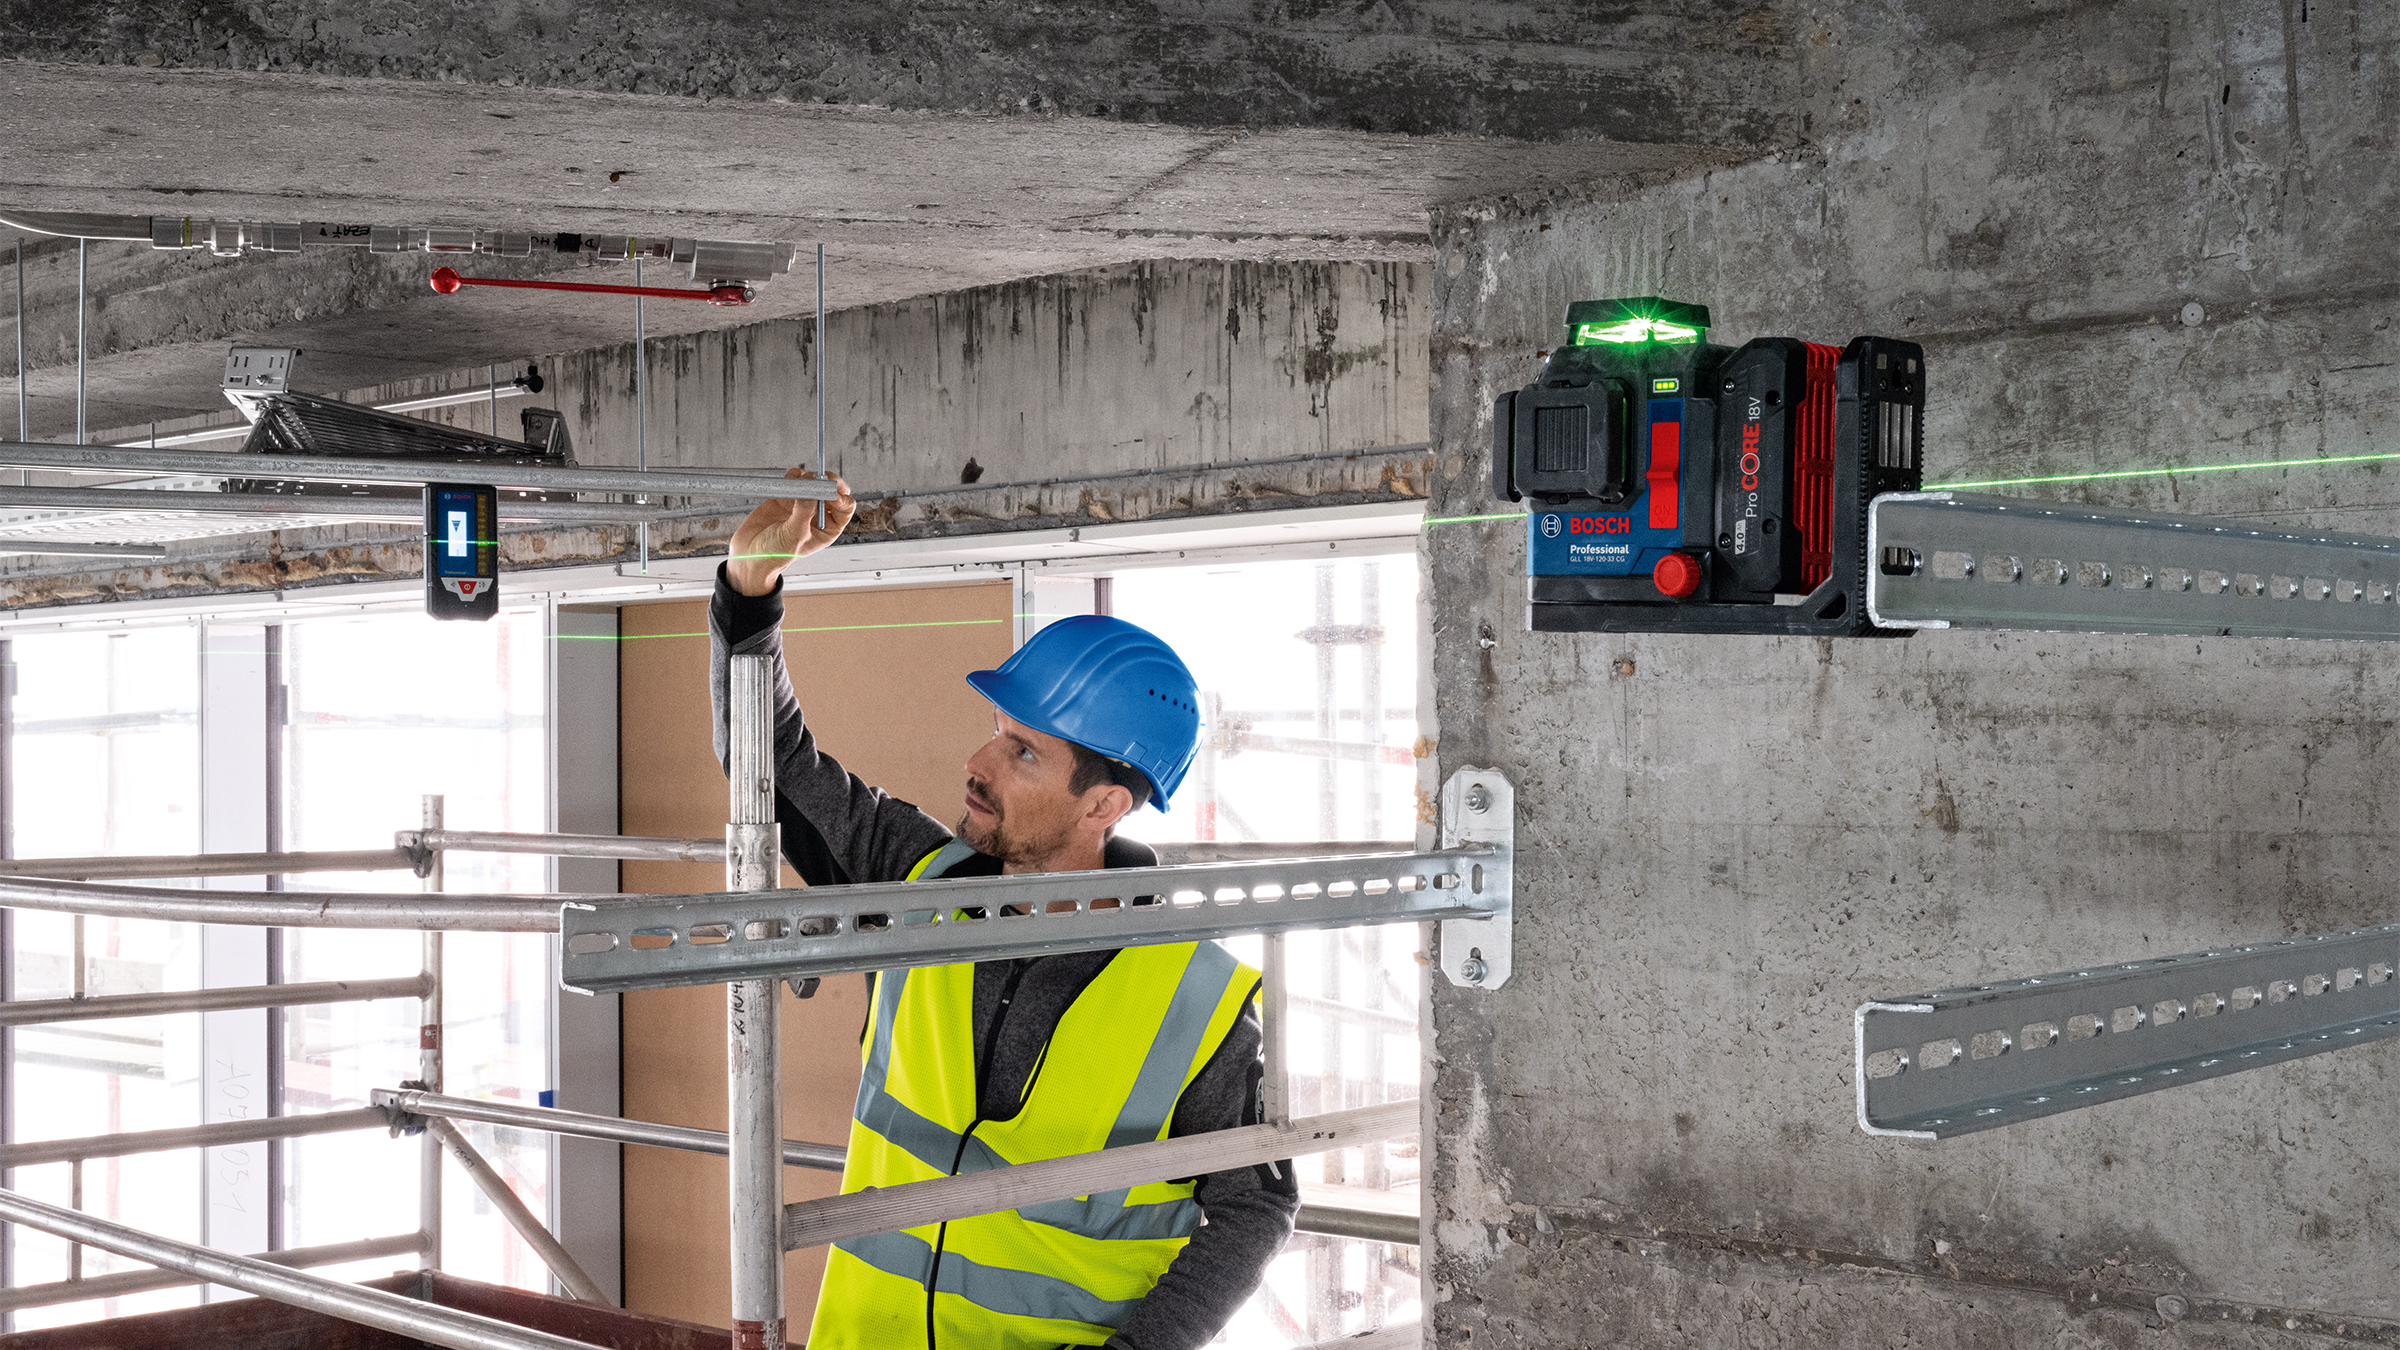 Up to three different power sources for maximum flexibility: Bosch GLL 18V-120-33 CG Professional